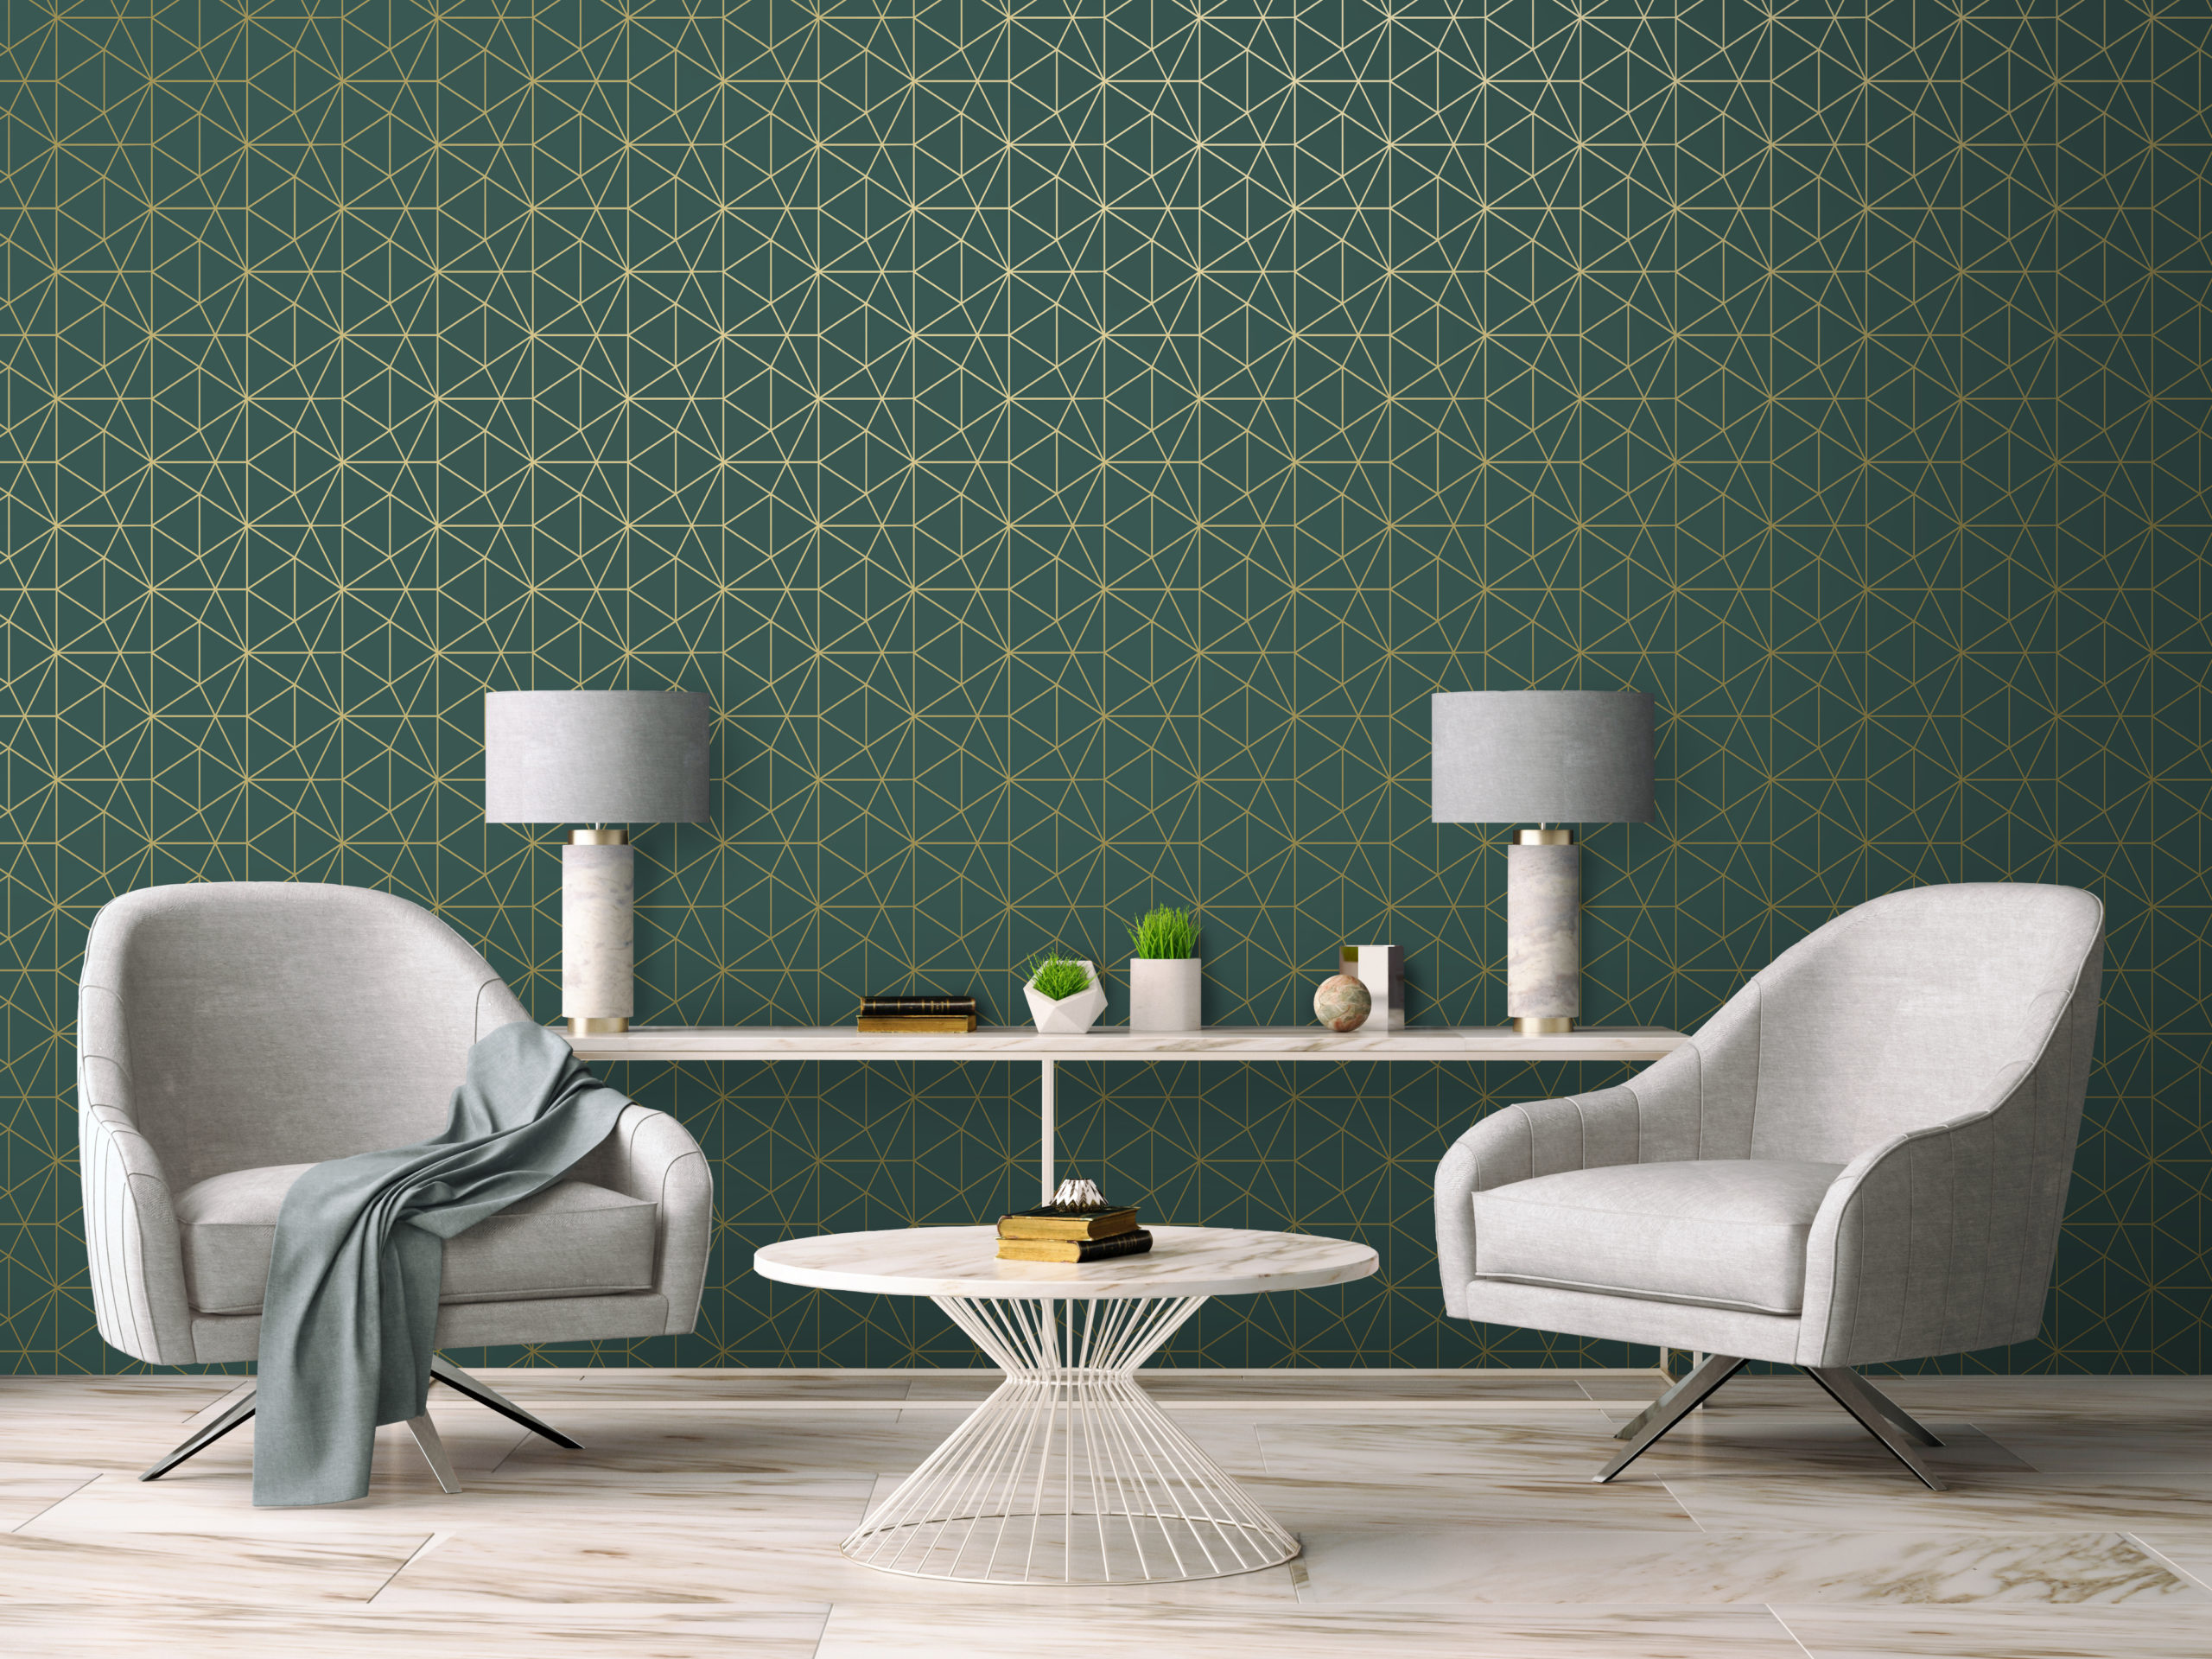 Metro Prism Geometric Triangle Wallpaper - Emerald Green and Gold - WOW037